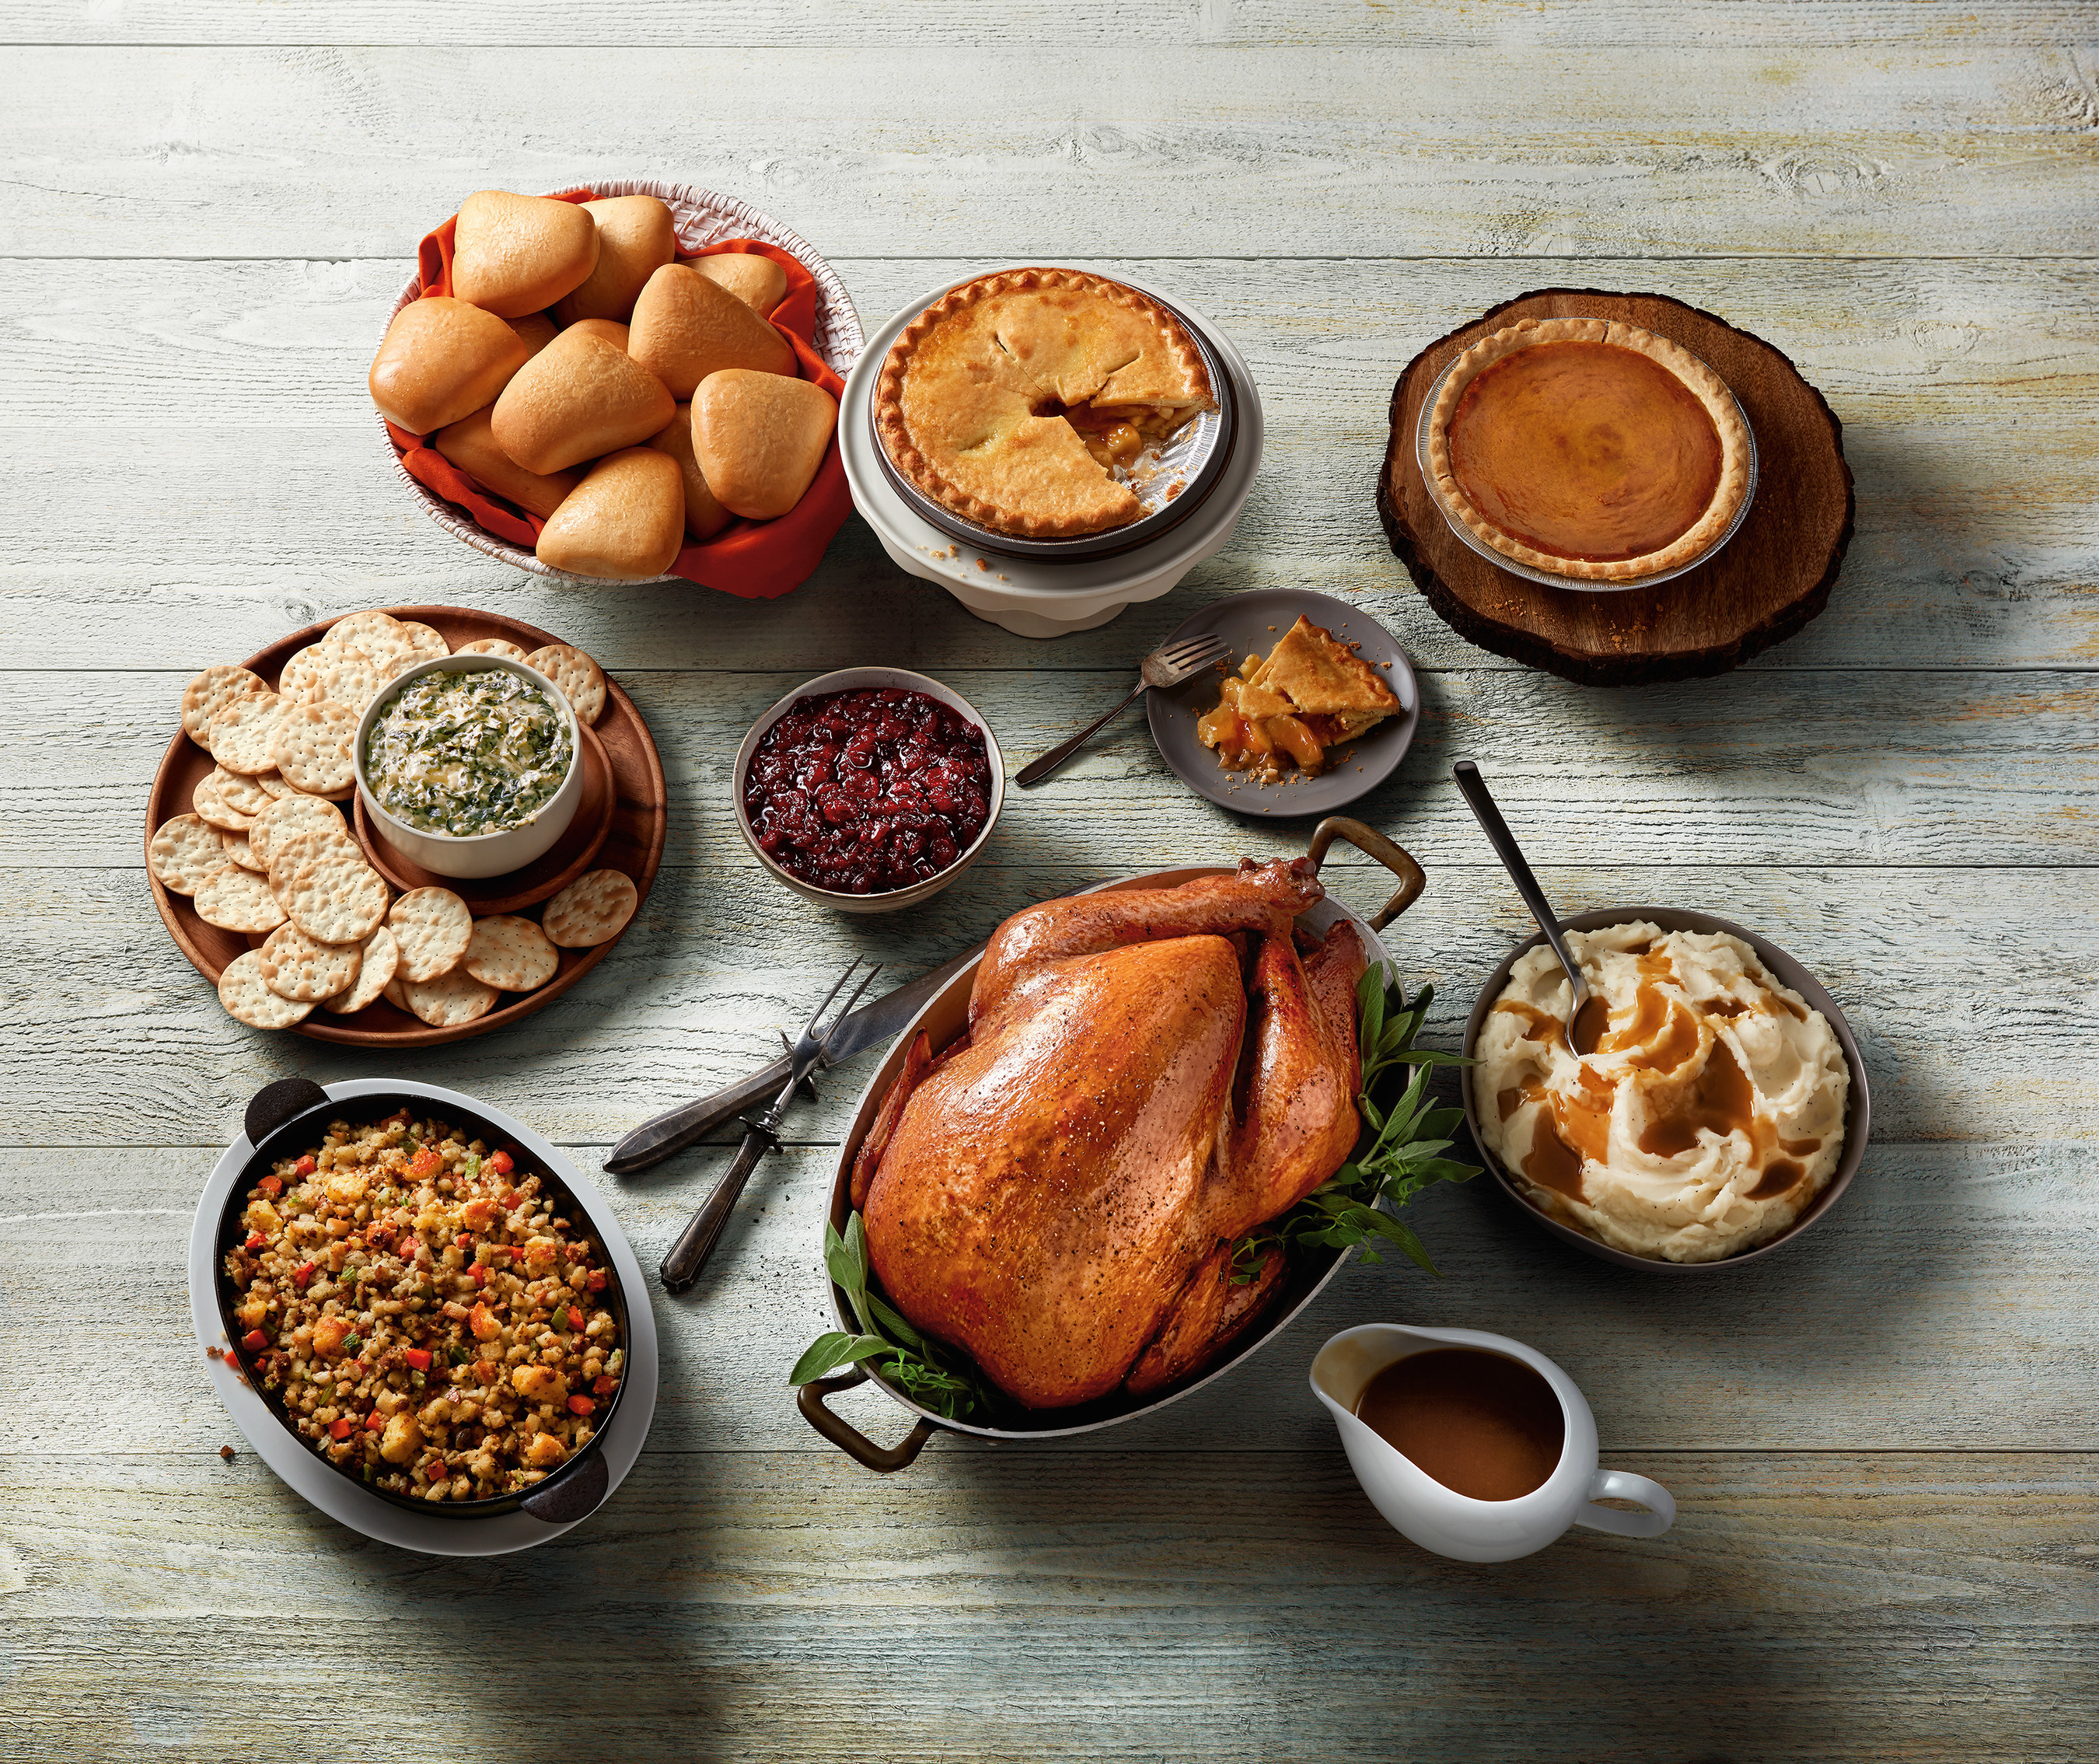 Boston Market Brings Loved Ones Together With Delicious Meal Options For Any Holiday Celebration